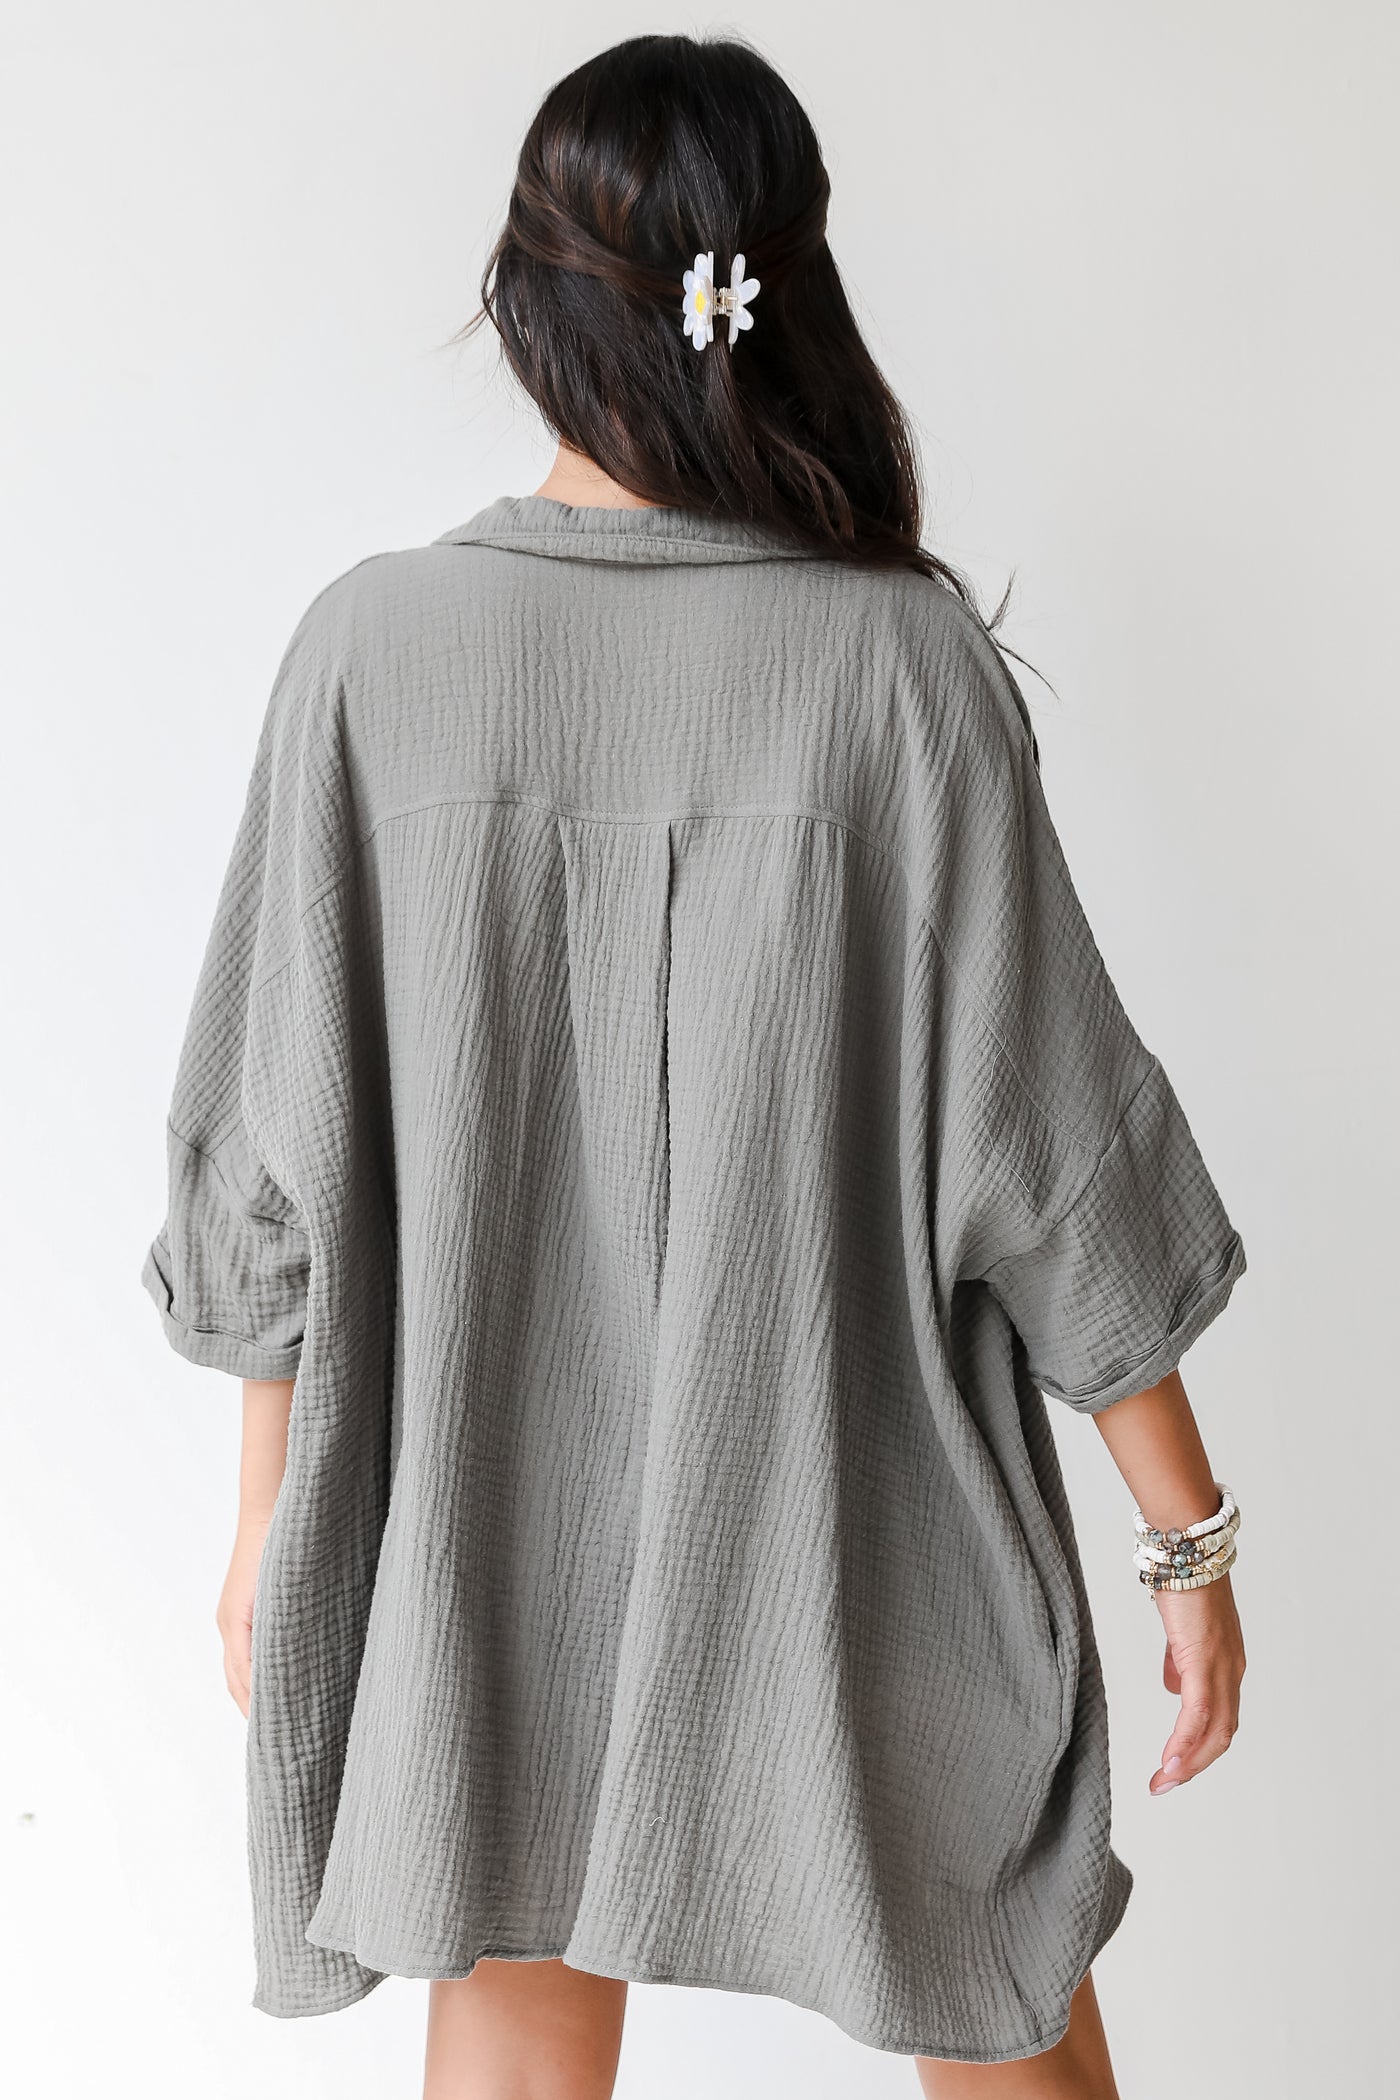 Linen Tunic in olive back view